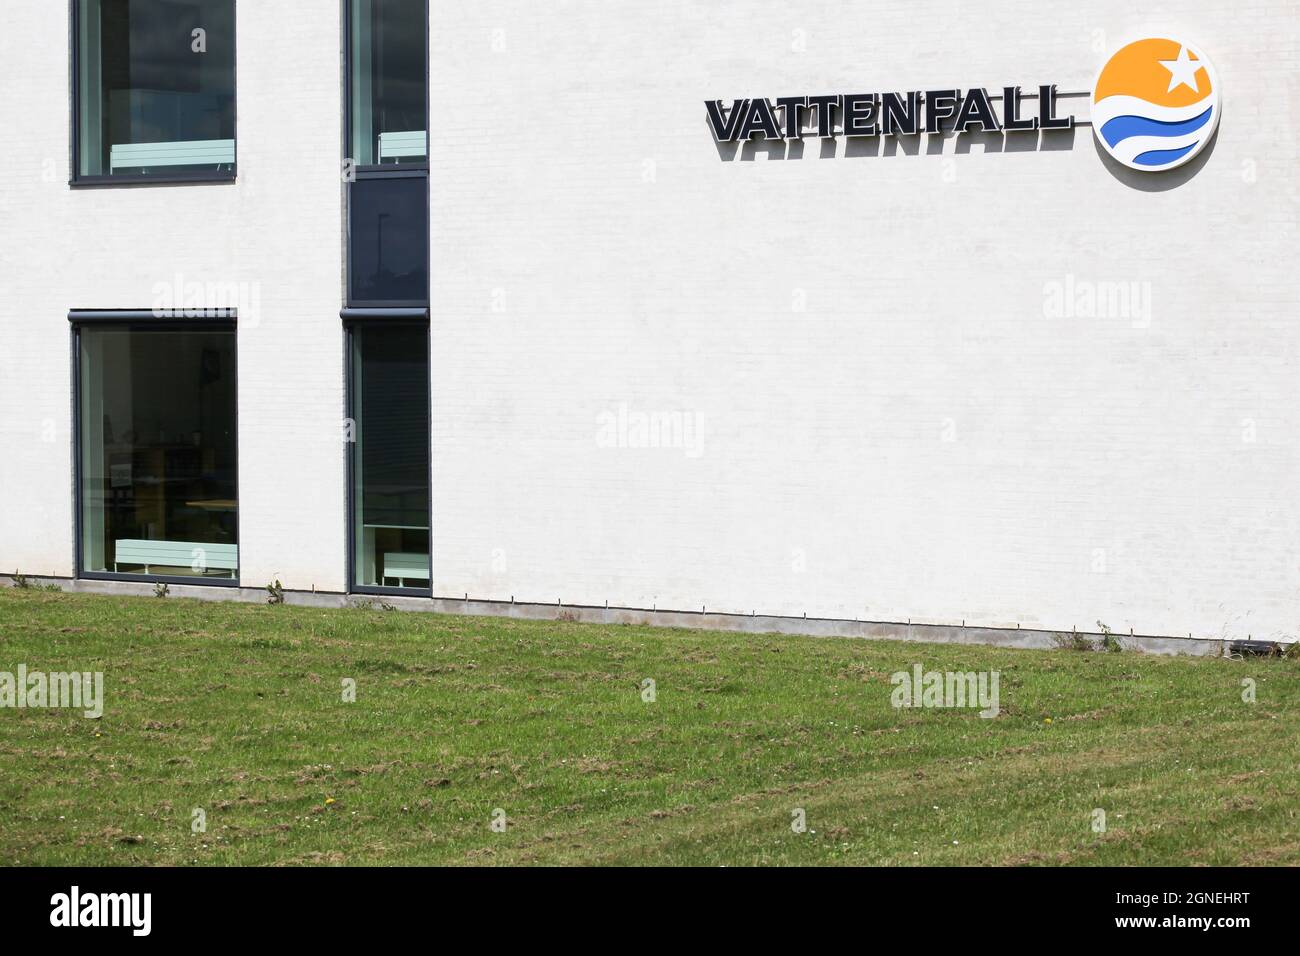 Kolding, Denmark - July 9, 2017: Vattenfall is a Swedish power company, wholly owned by the Swedish government Stock Photo